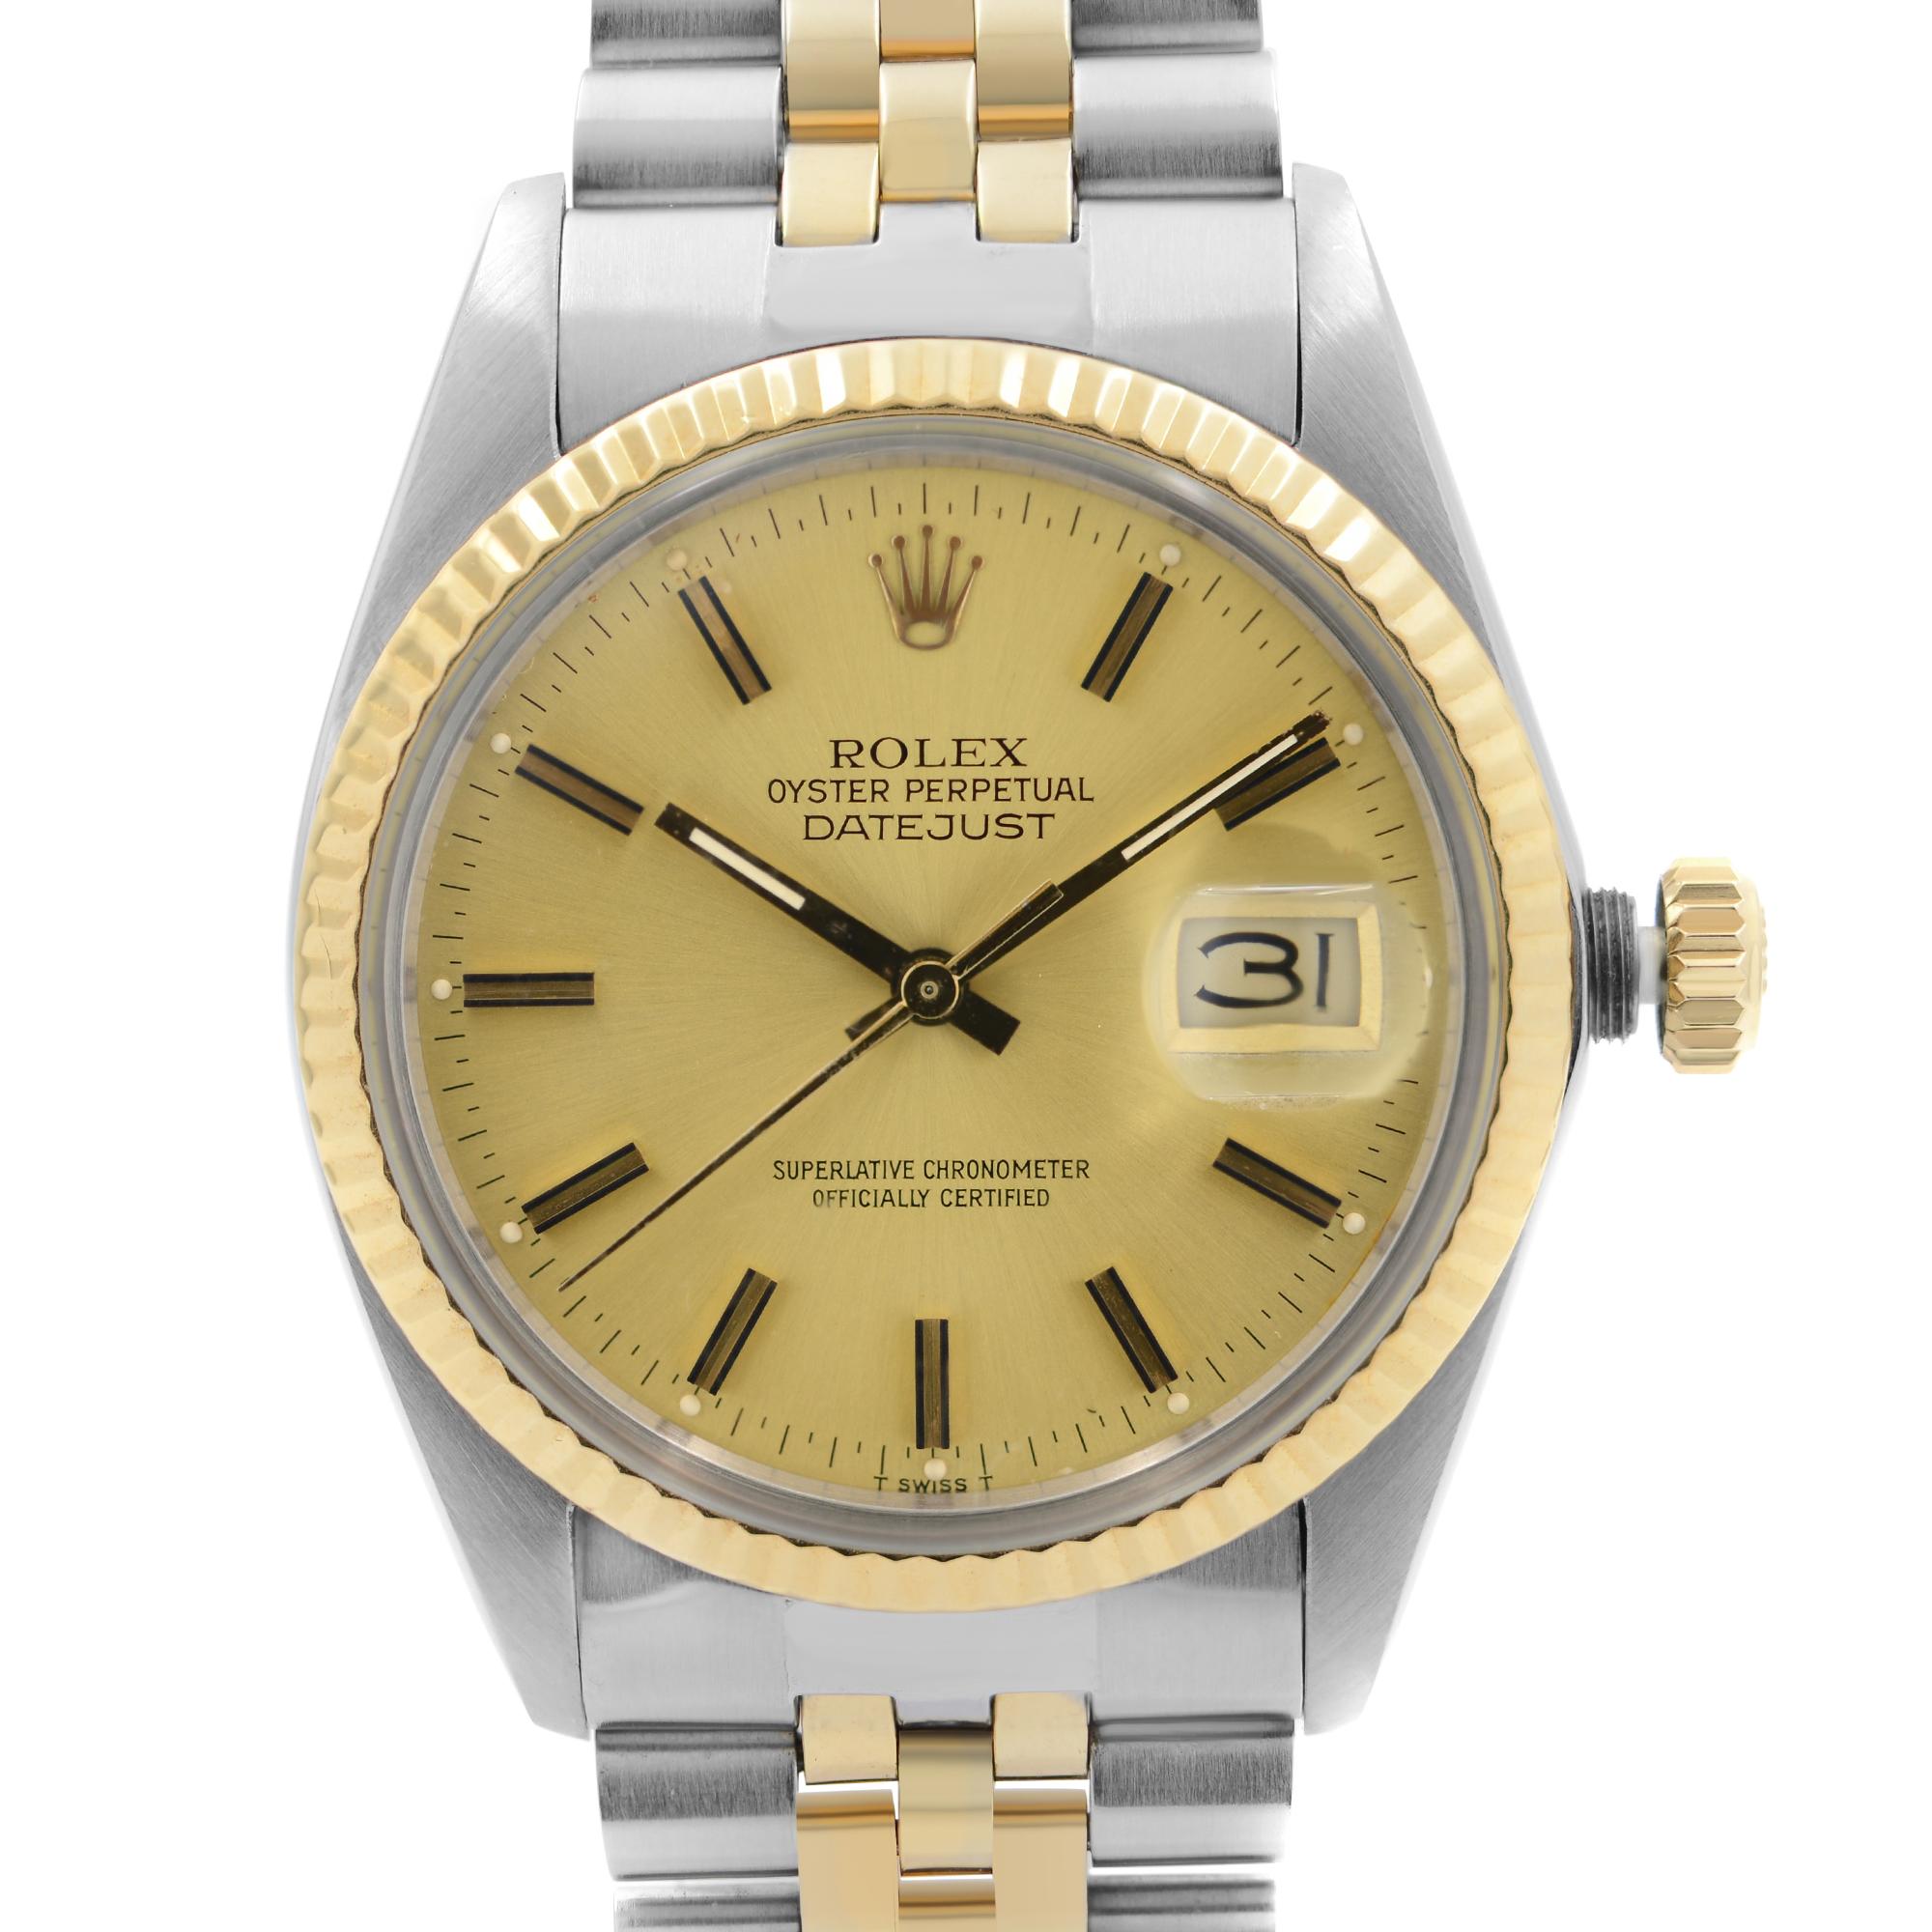 Pre Owned Rolex Datejust 36mm 18k Gold Steel Champagne Dial Automatic Men's Watch 16013.  Minor Patina On Hands. Band Have Moderate Slack. This Beautiful Timepiece was Produced in 1985 & is Powered by Mechanical (Automatic) Movement And Features: